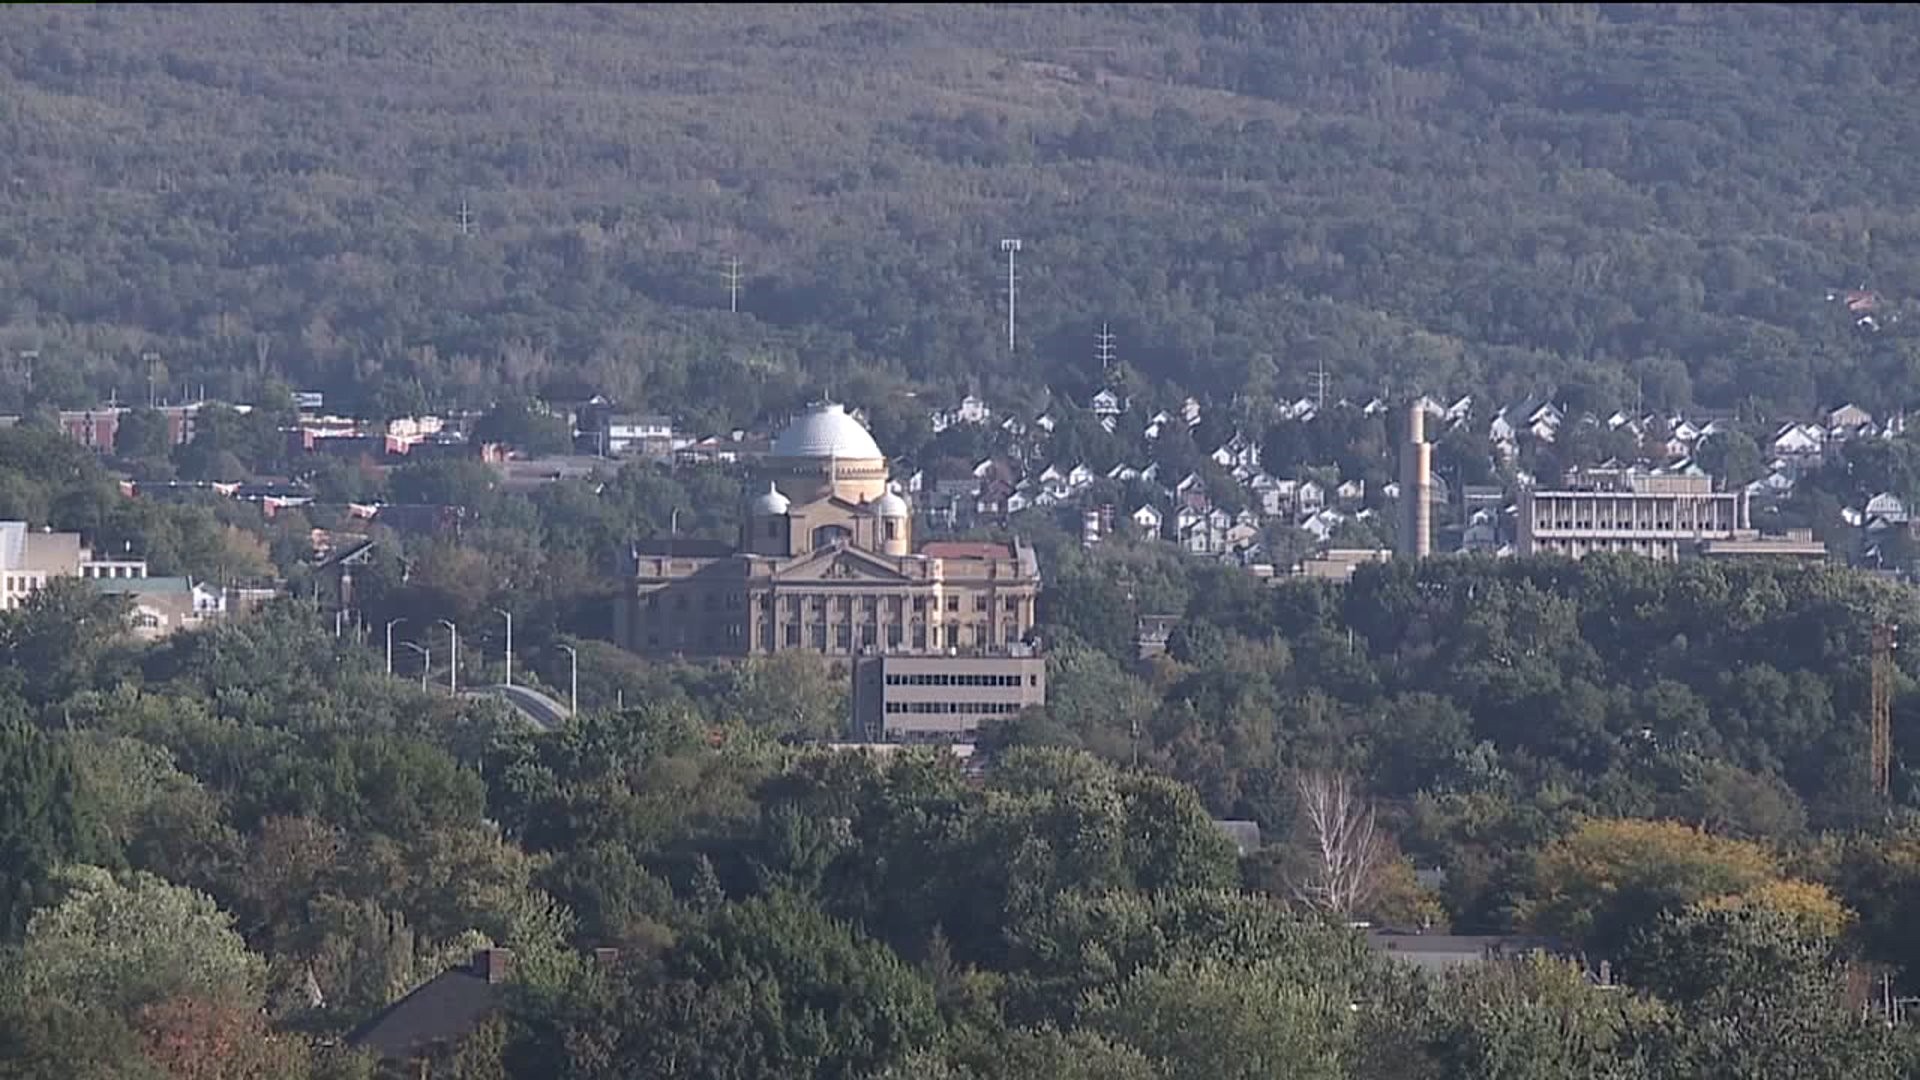 Luzerne County Voters React to Impeachment Inquiry Launched Against President Trump